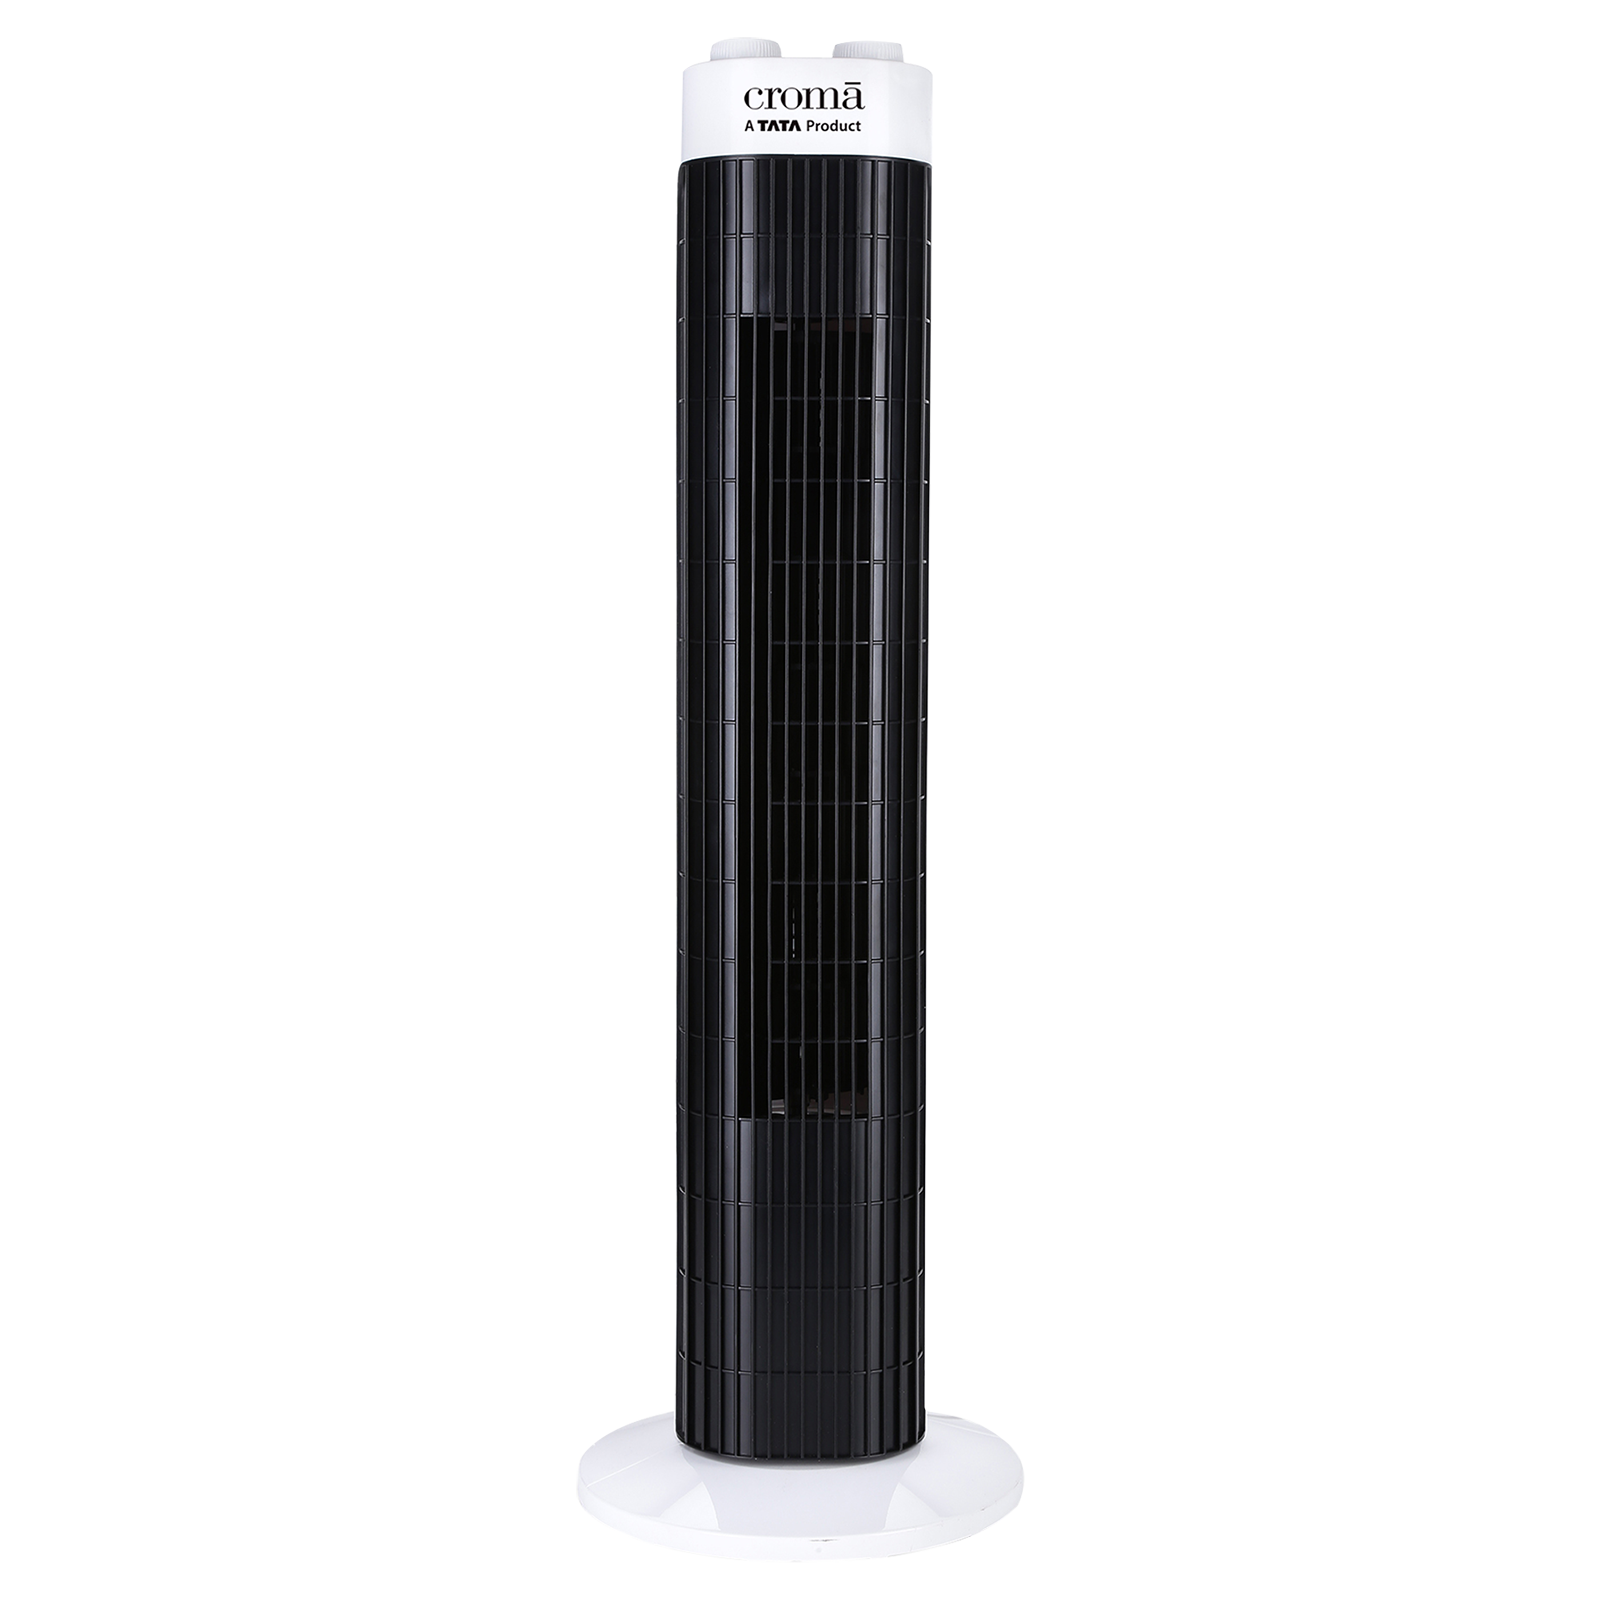 Croma Bladeless 540 m3/hr Air Delivery Tower Fan (Blade Free Design, White & Black)